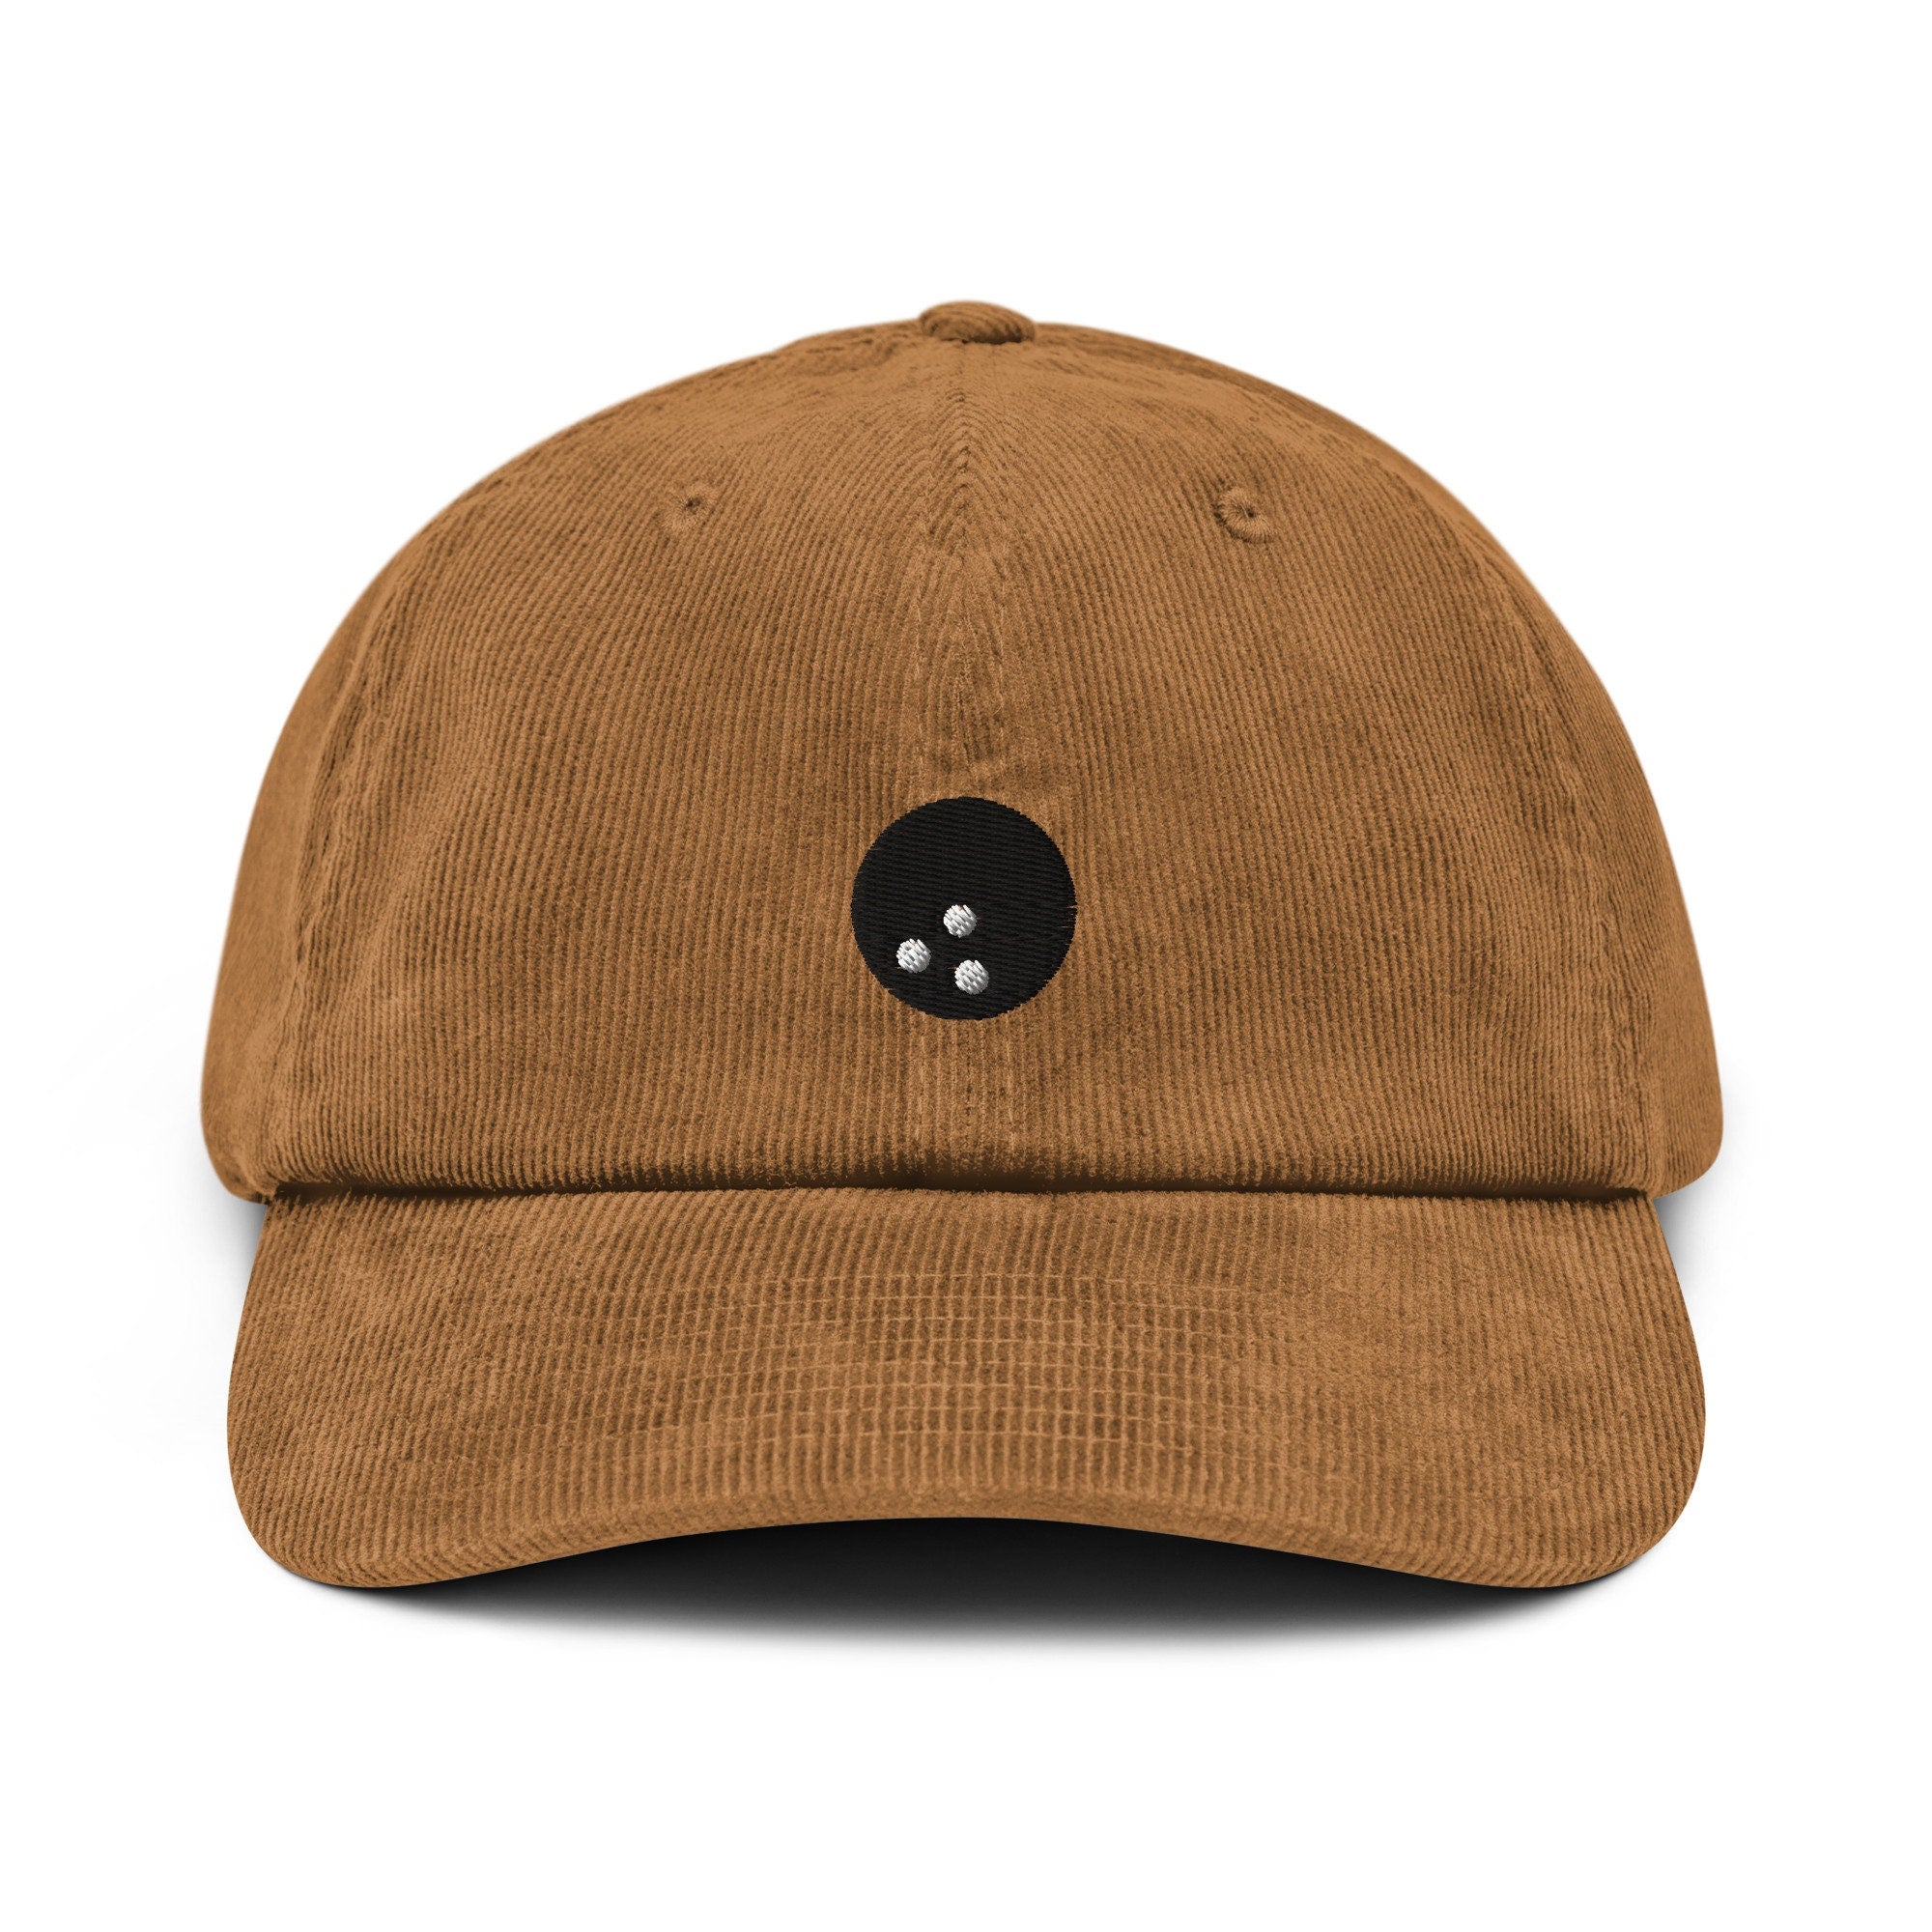 Bowling Ball Corduroy Hat, Handmade Embroidered Corduroy Dad Cap - Multiple Colors